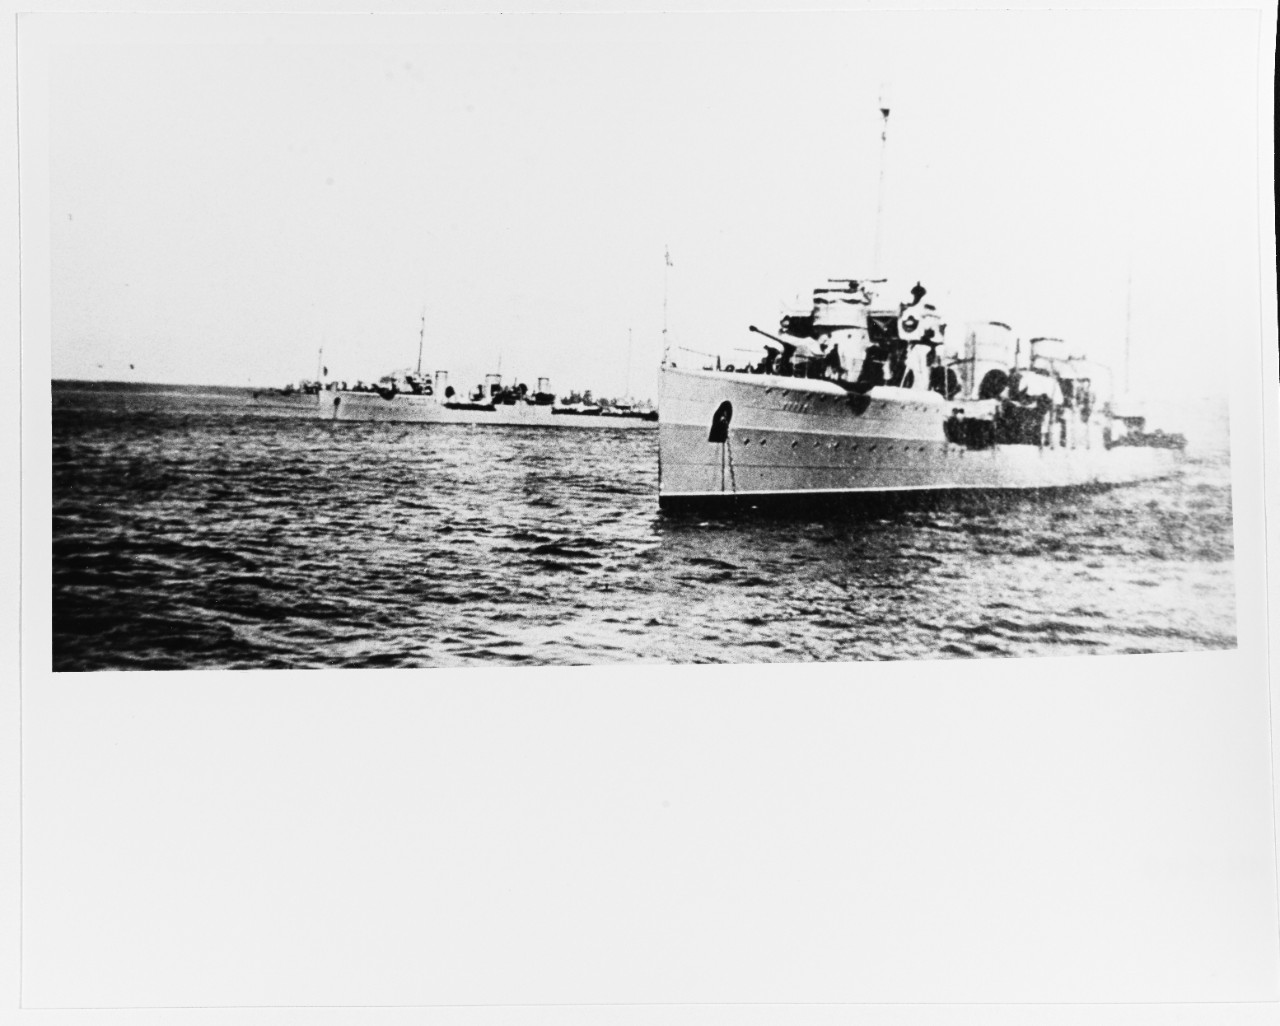 Russian Destroyers of the "Improved Novik" Type in 1916.